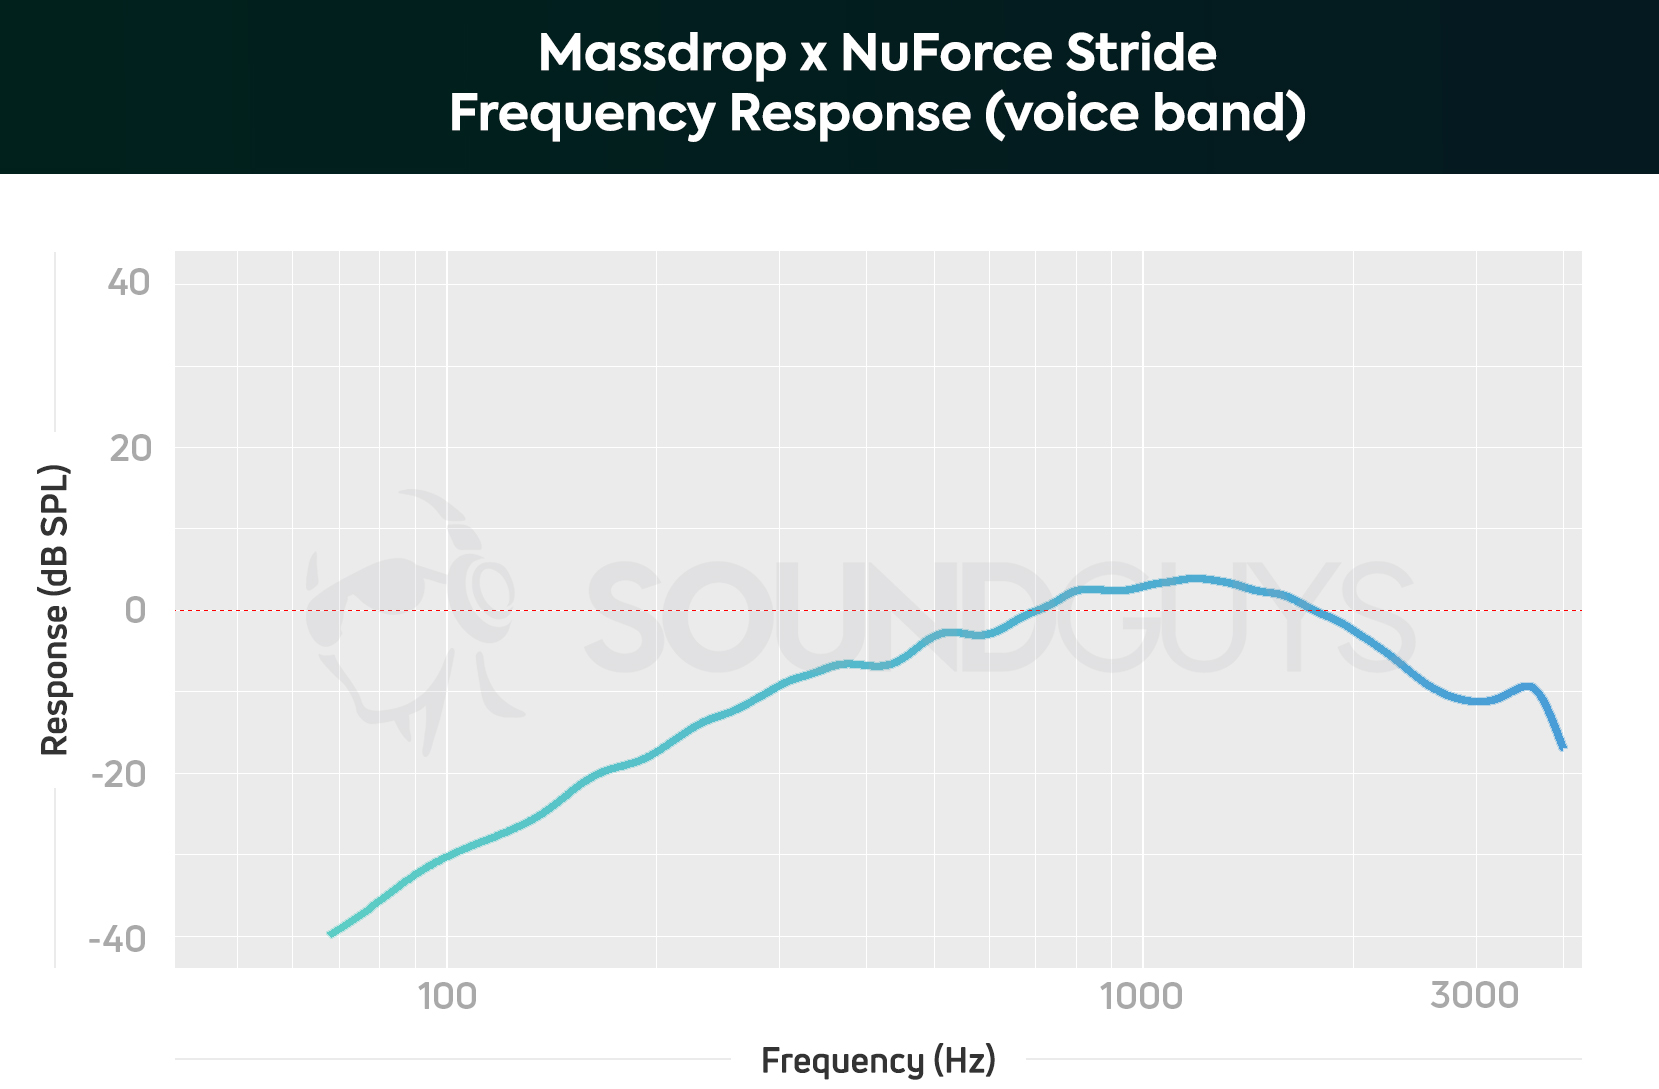 Frequency response chart of the Massdrop x NuForce Stride wireless earbuds limited to the microphone's voice band.